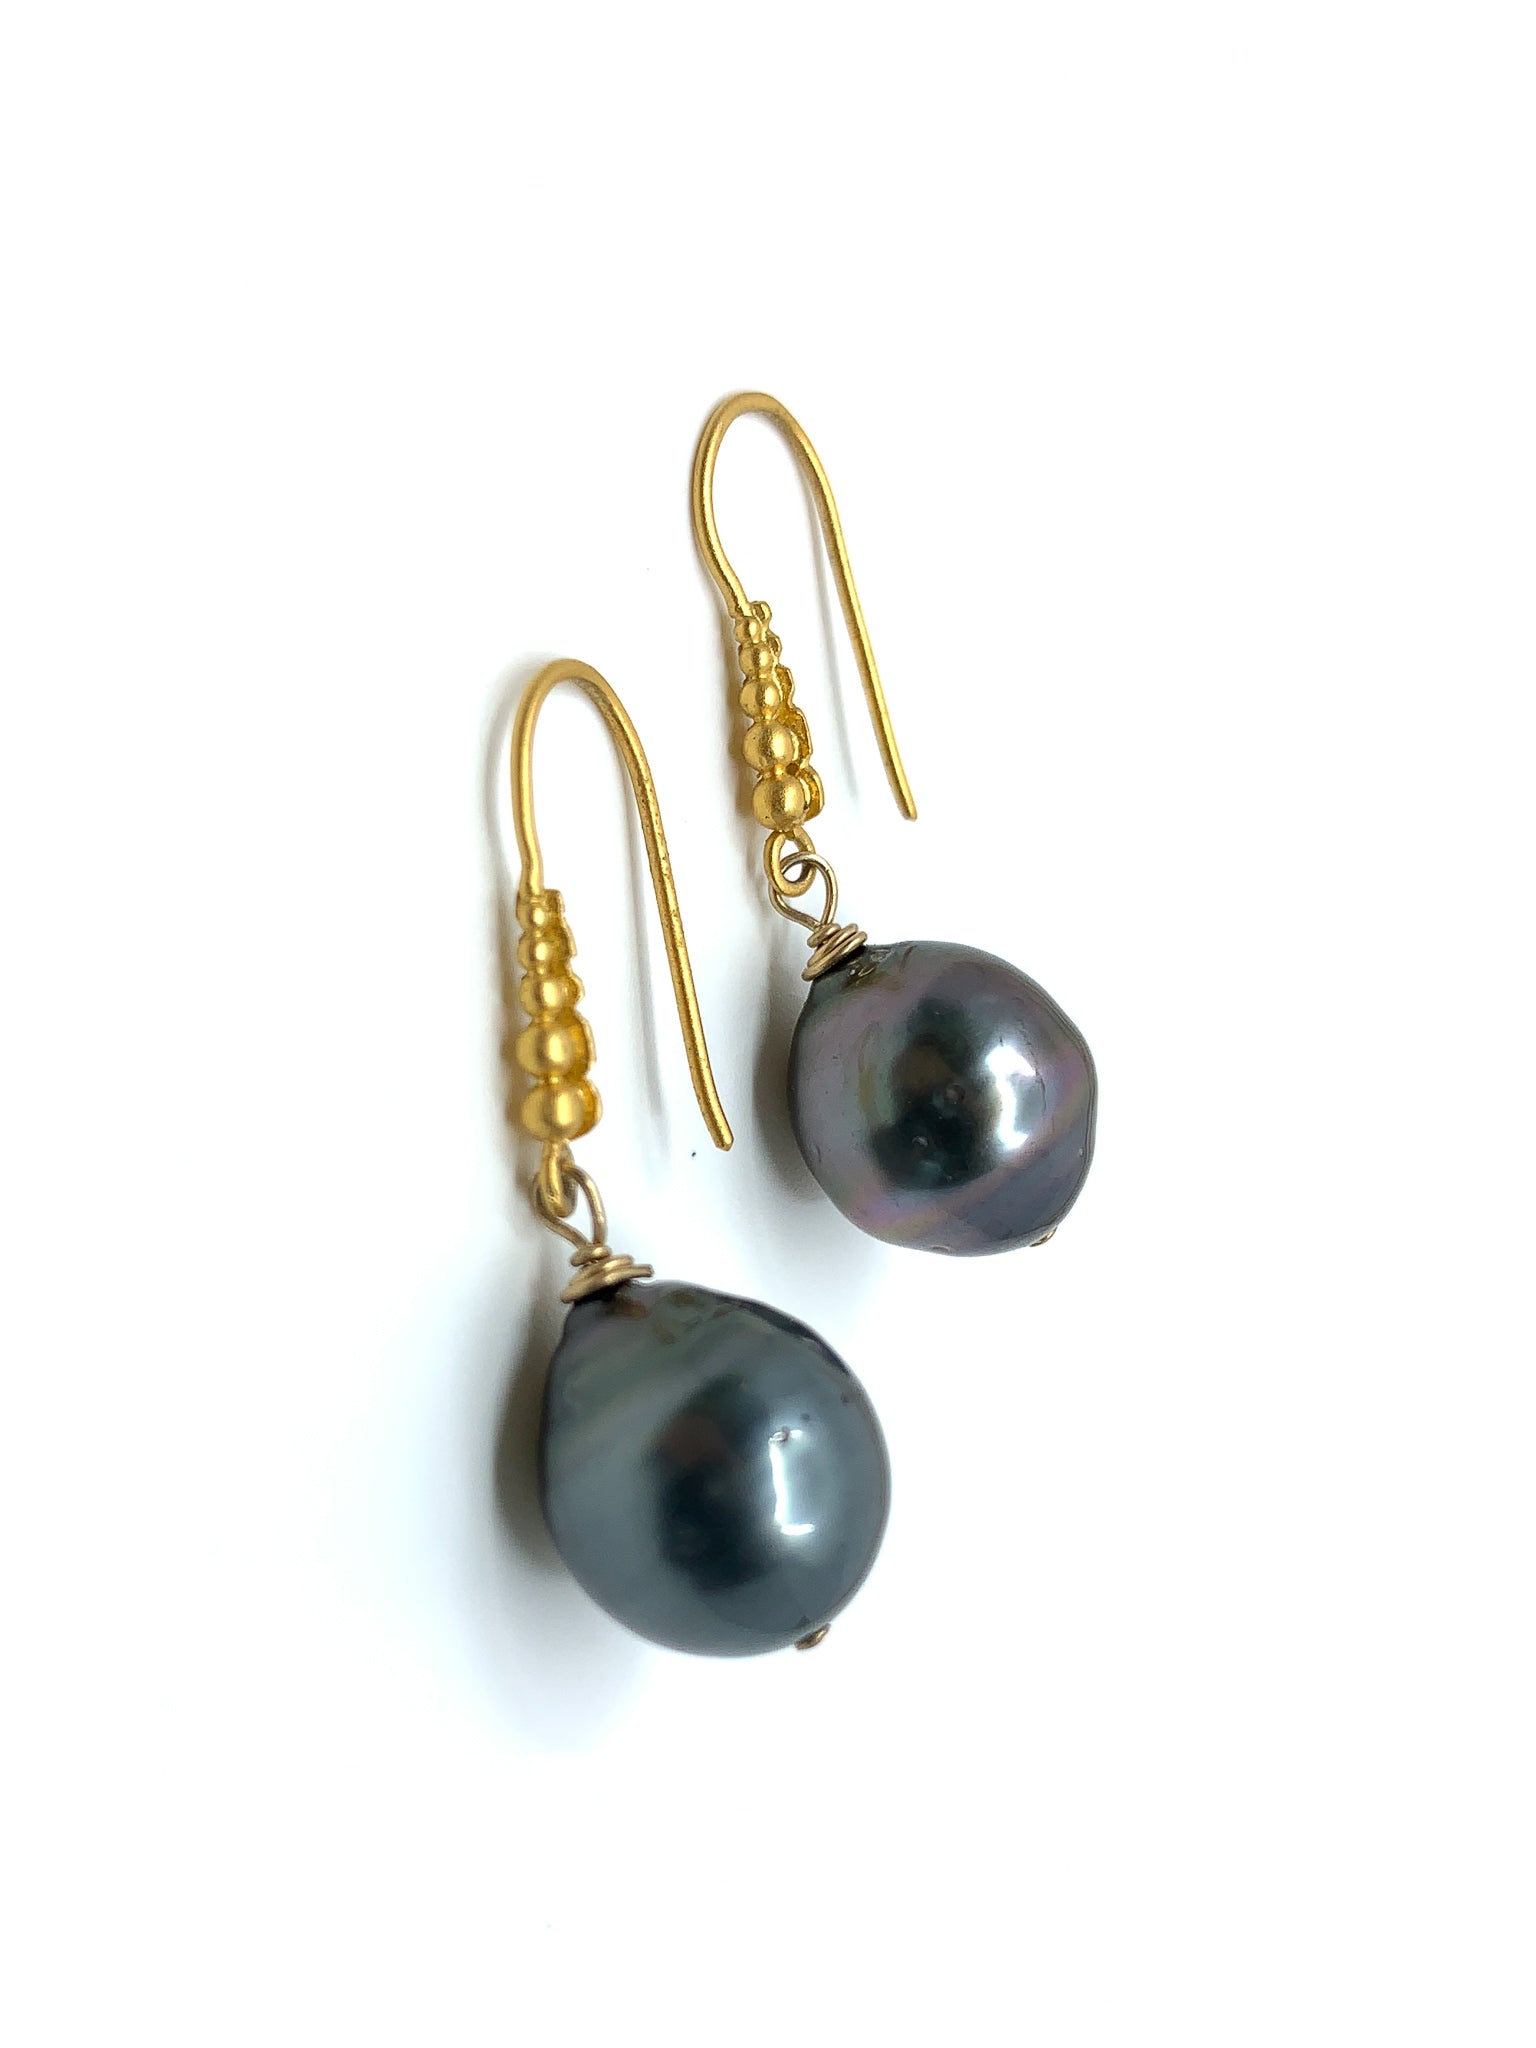 granulated Tahitian pearl gold earrings by eve black jewelry made in Hawaii